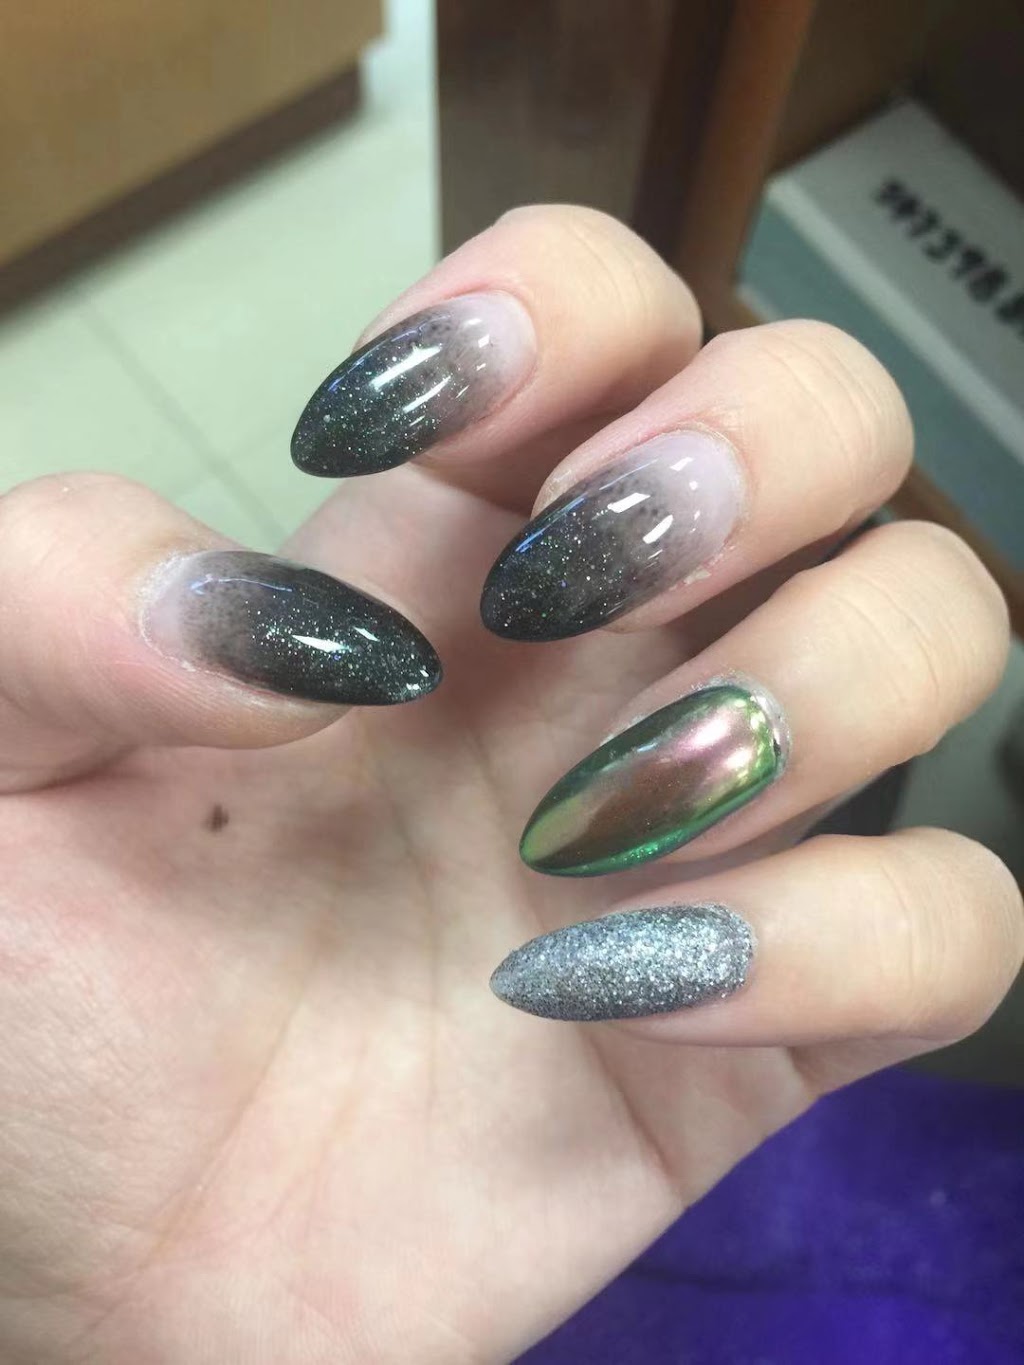 Paradise Nails and Spa 2 (Shopping Mall) | Shopping Center, between T-Mobile and, Starbucks, 815 Hutchinson River Pkwy, Bronx, NY 10465 | Phone: (347) 398-8341